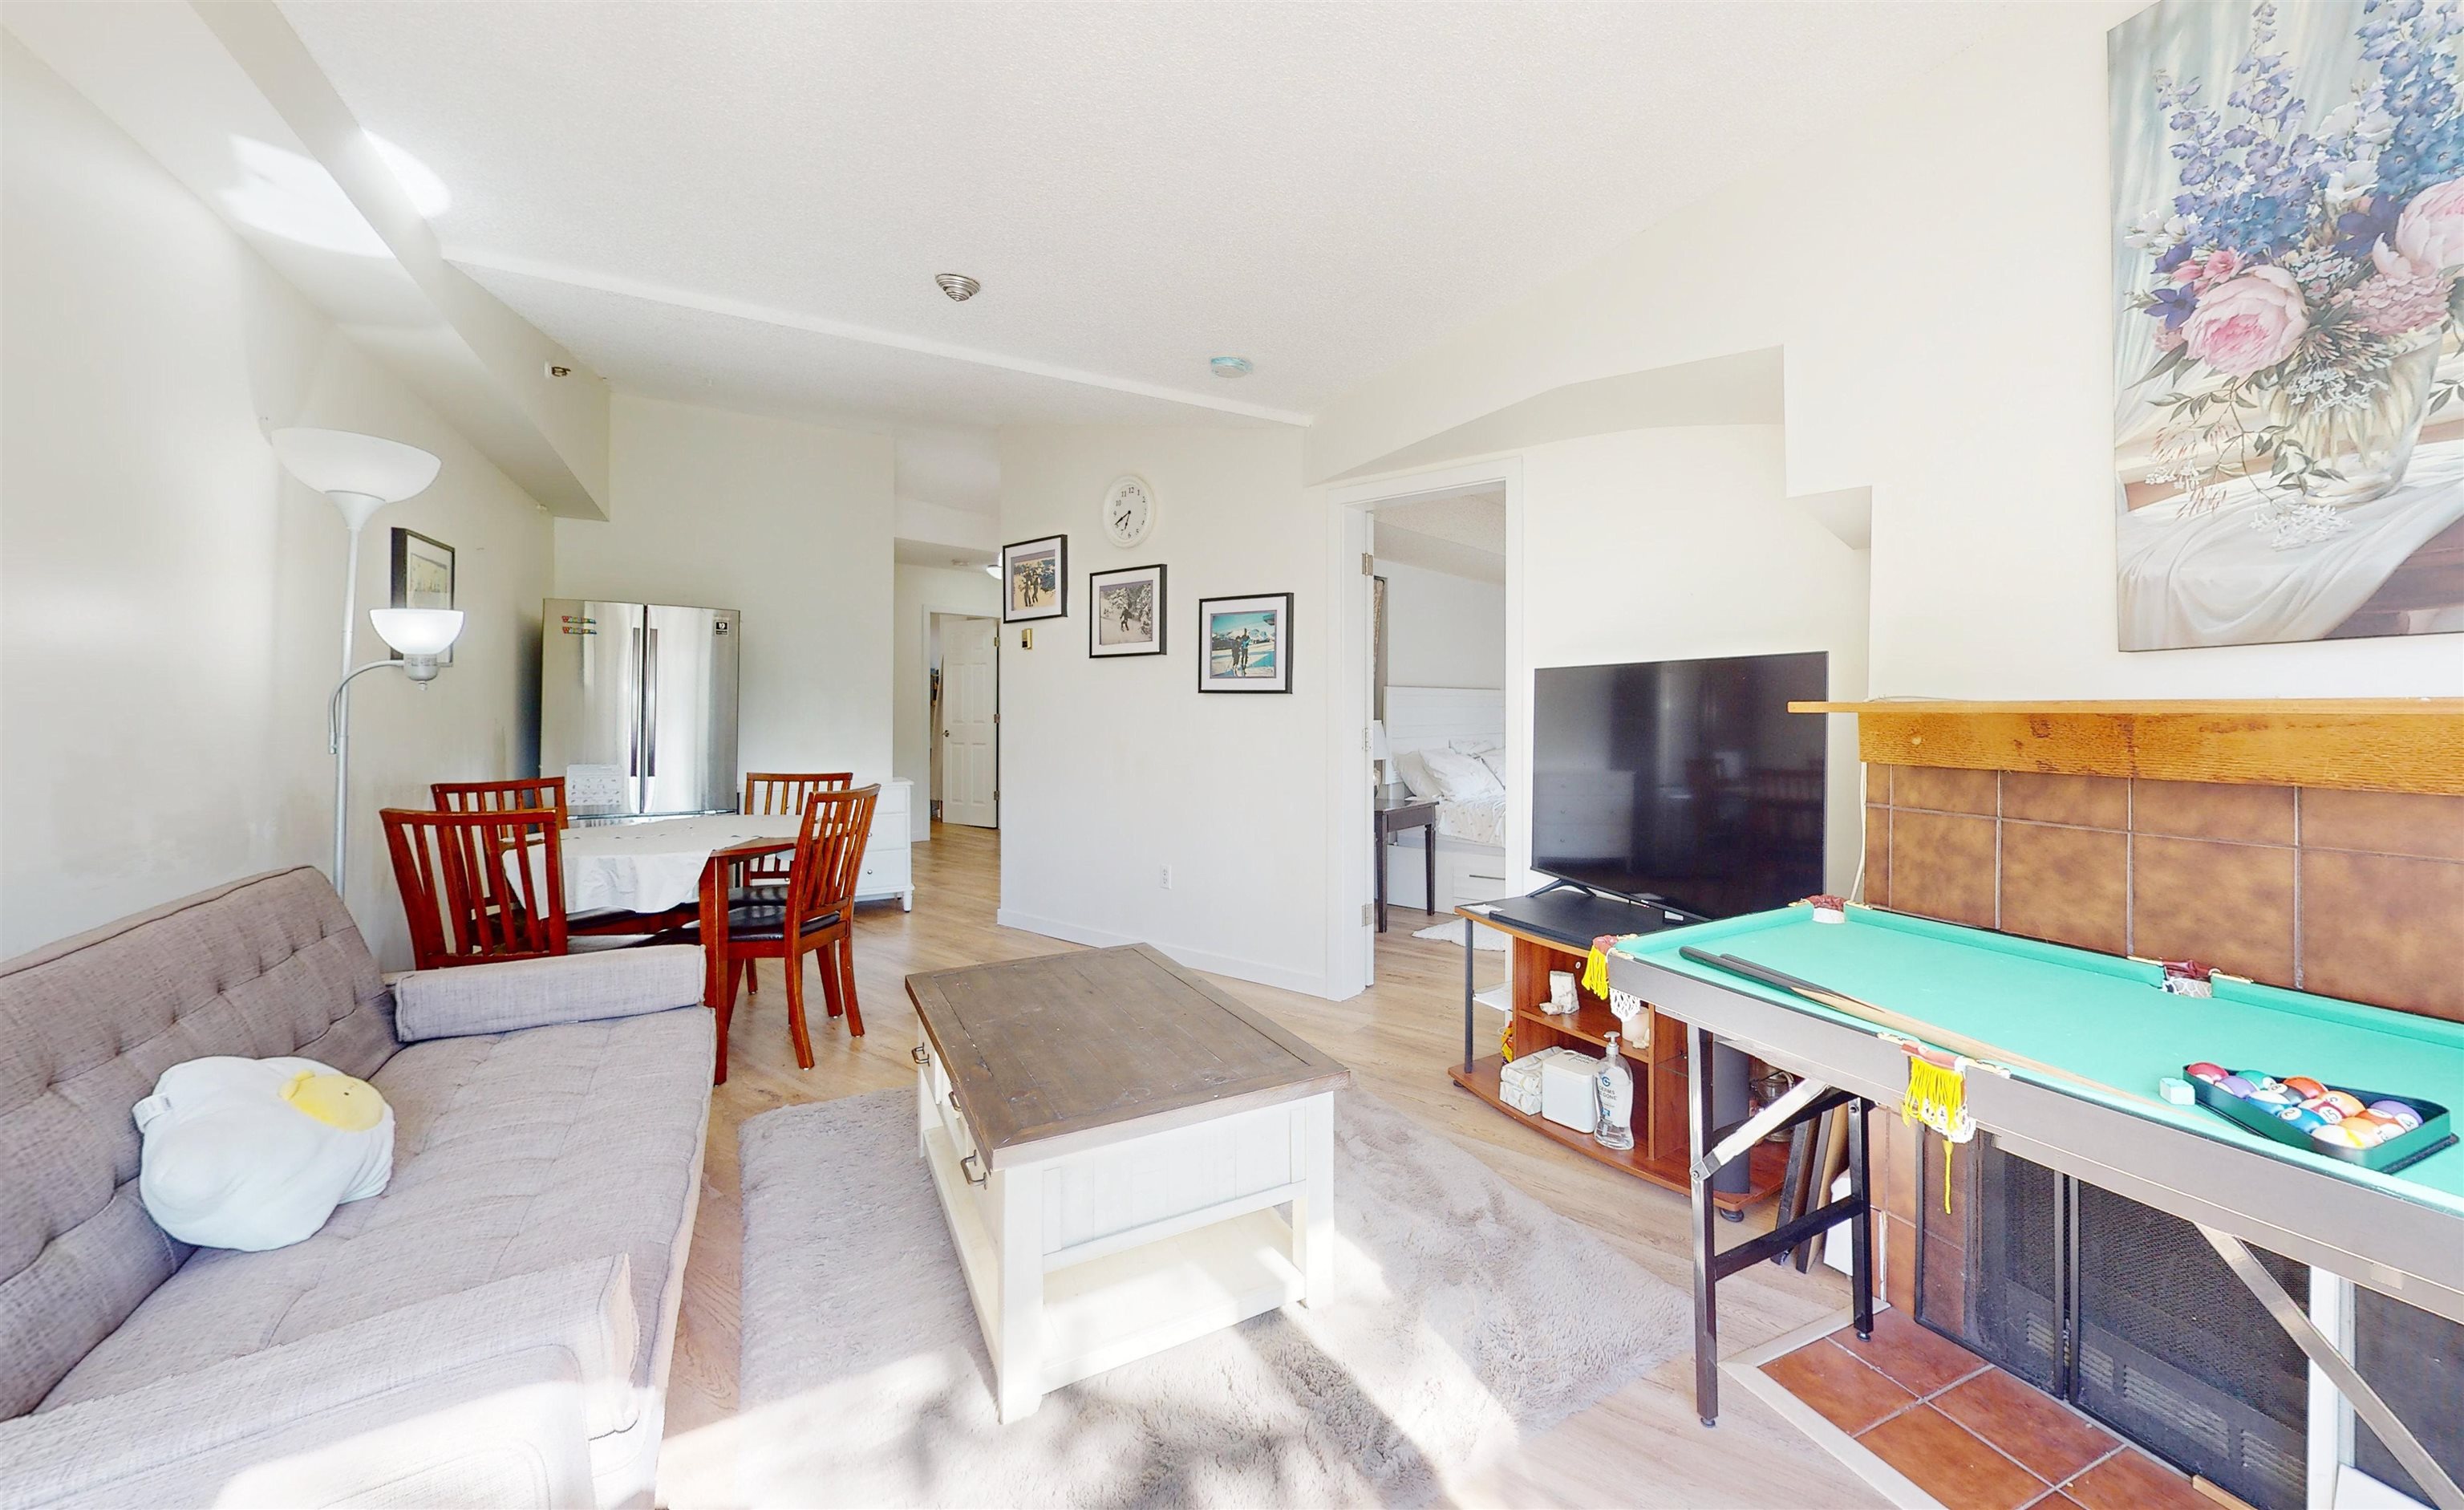 Listing image of 405/406 2111 WHISTLER ROAD